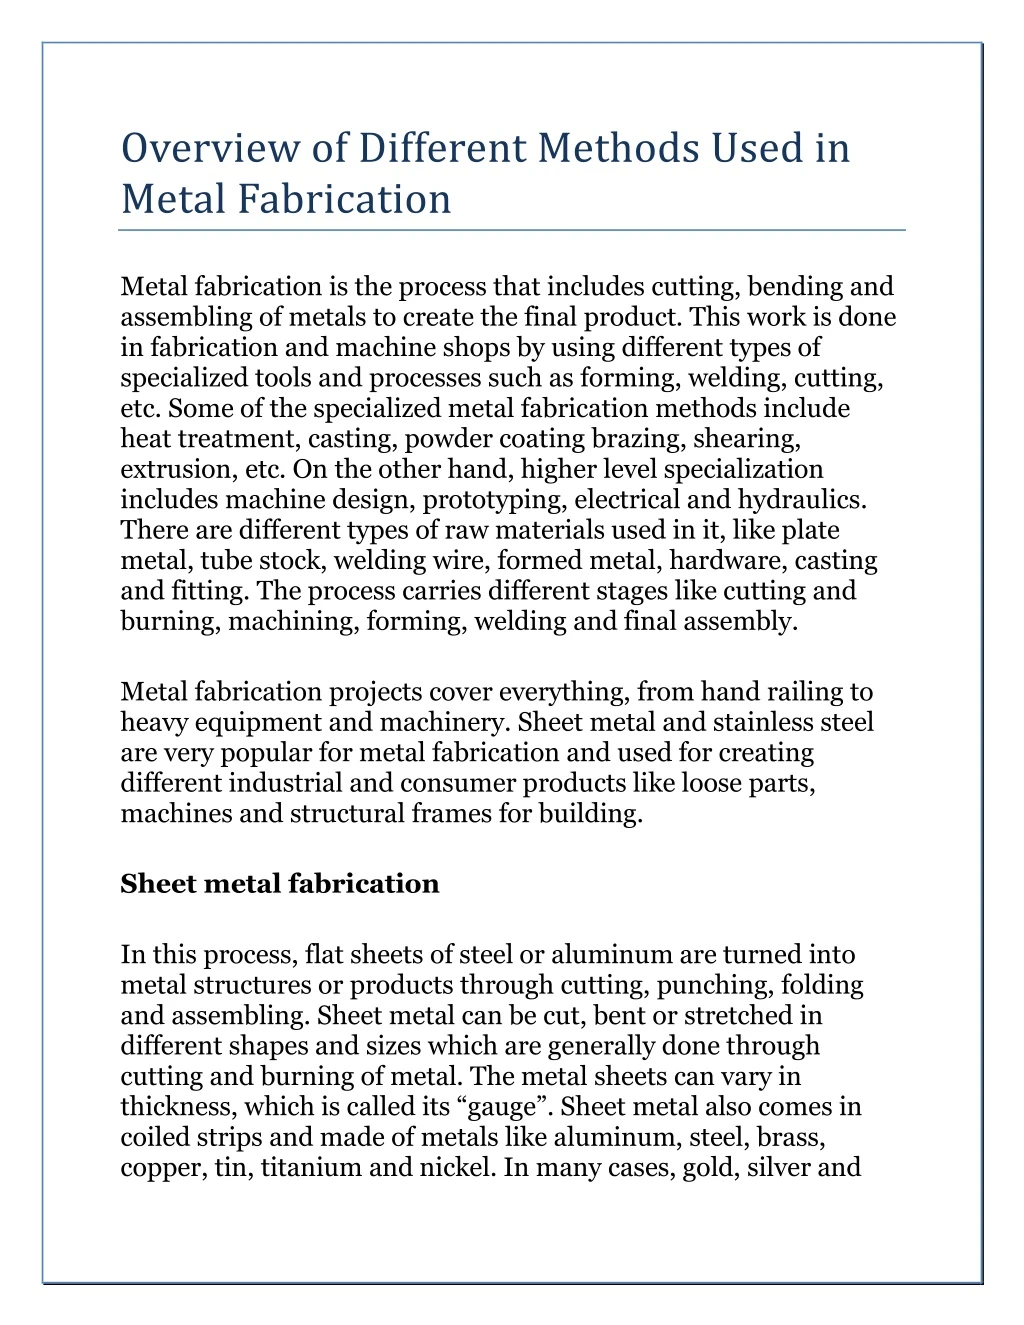 overview of different methods used in metal